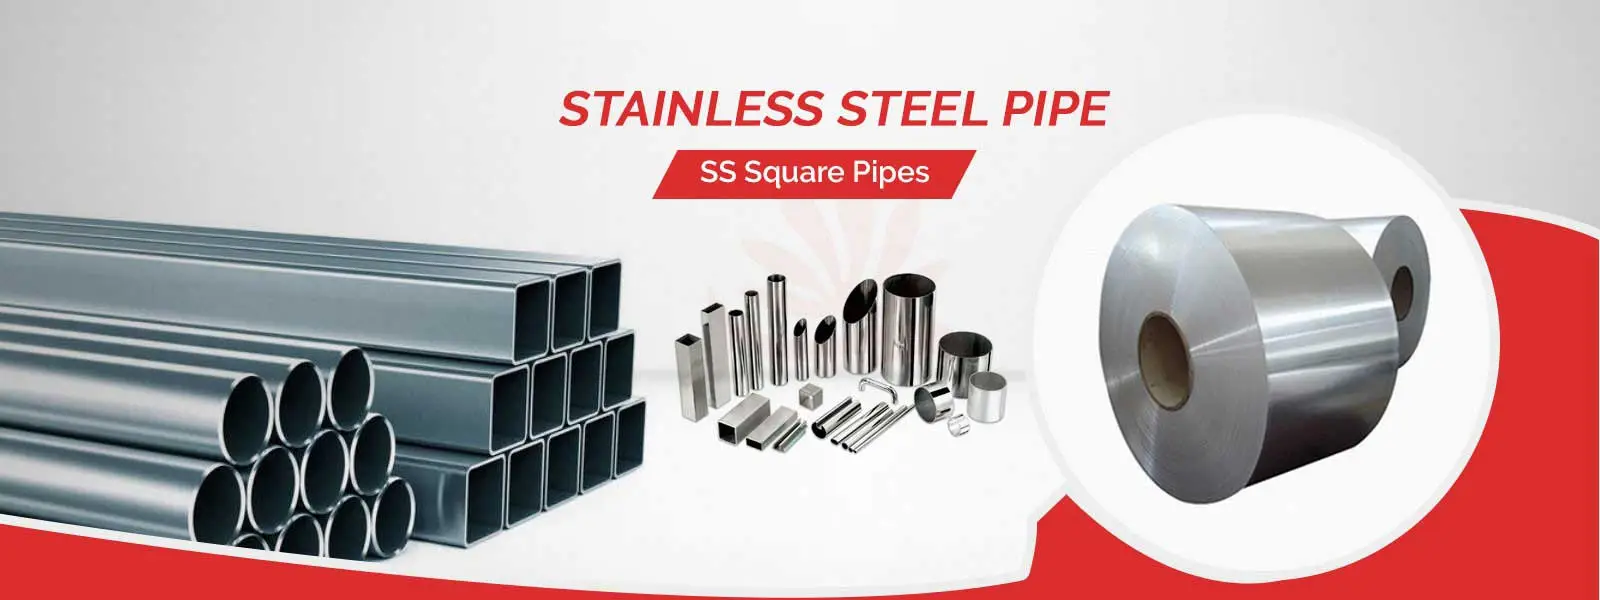 Stainless Steel Pipe Manufacturers in Assam